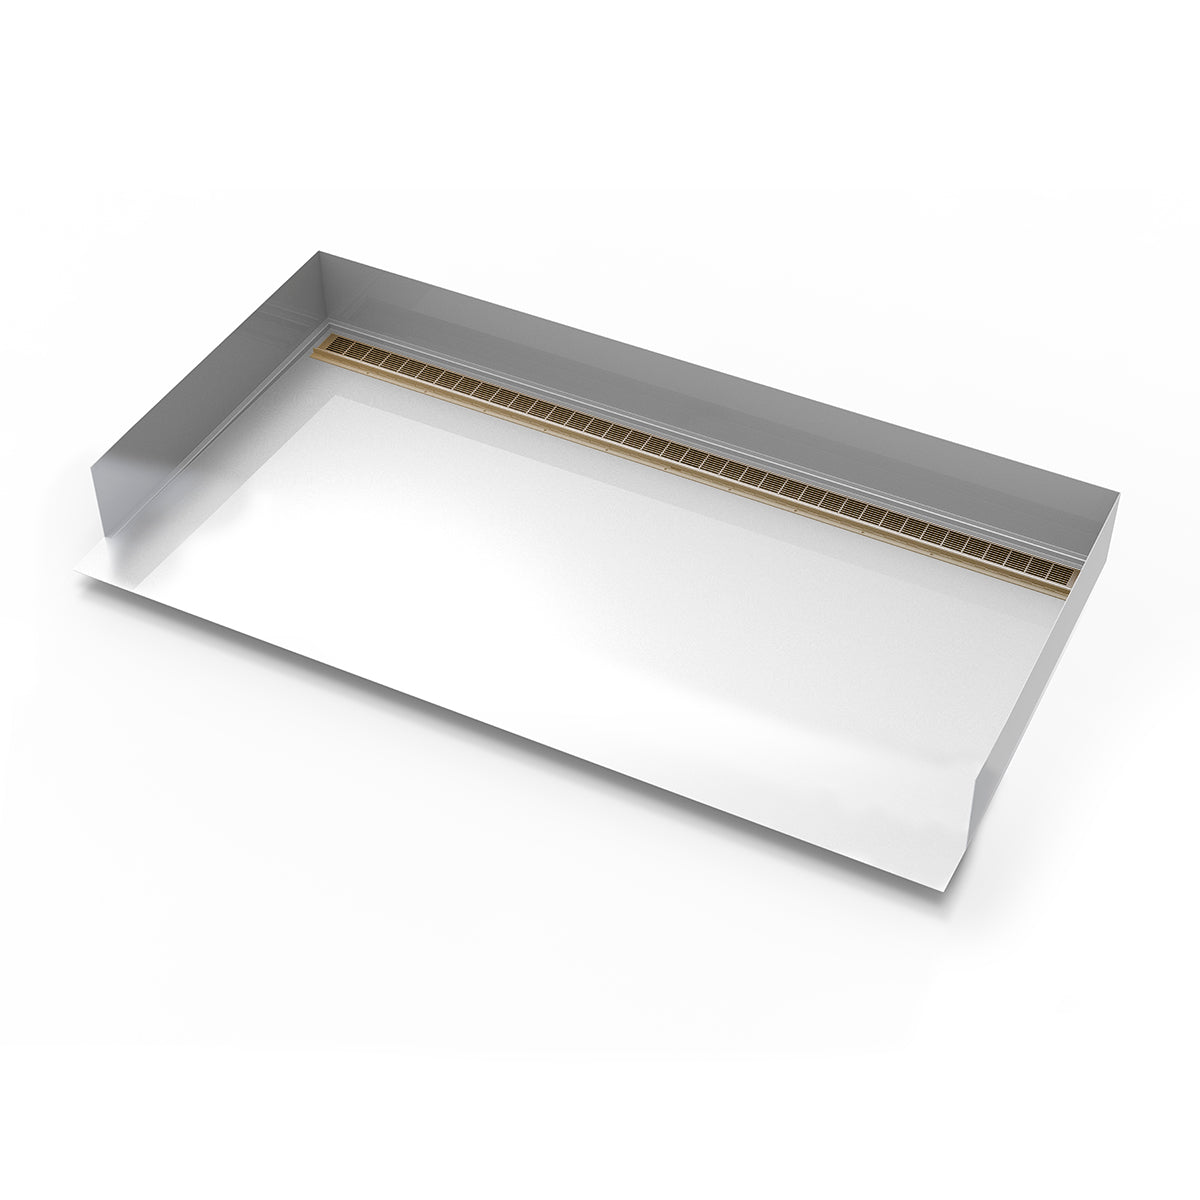 Infinity Drain 30"x 60" Curbless Stainless Steel Shower Base with Back Wall Slotted Pattern Linear Drain location